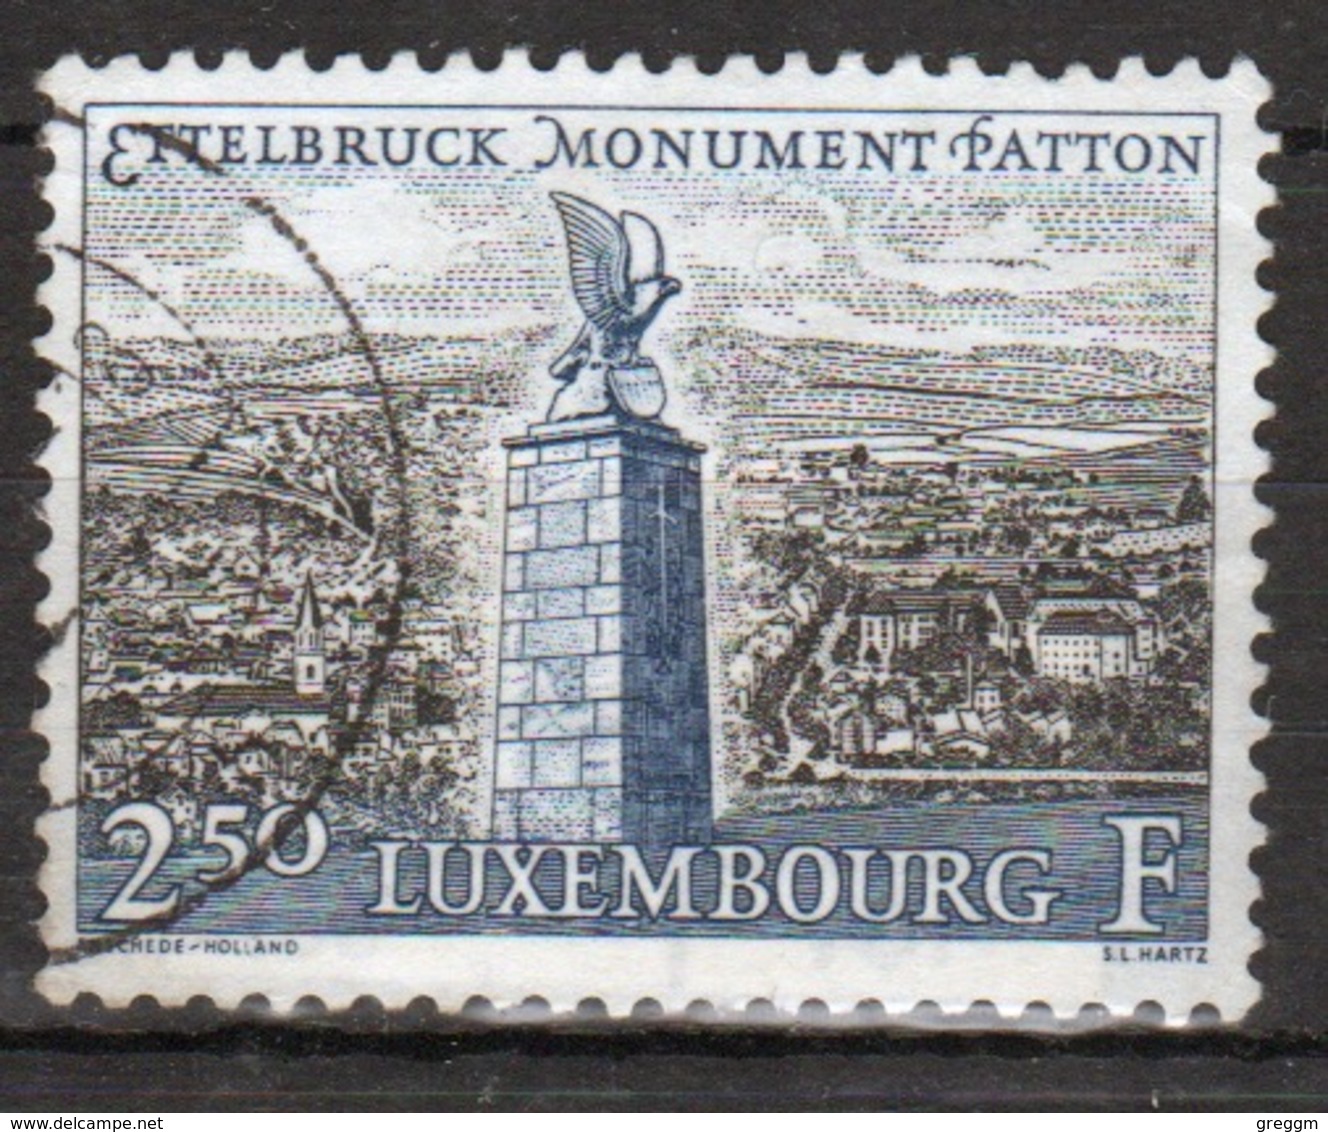 Luxembourg 1961 Single 2f 50 Commemorative Stamp Celebrating Tourist Publicity. - Used Stamps